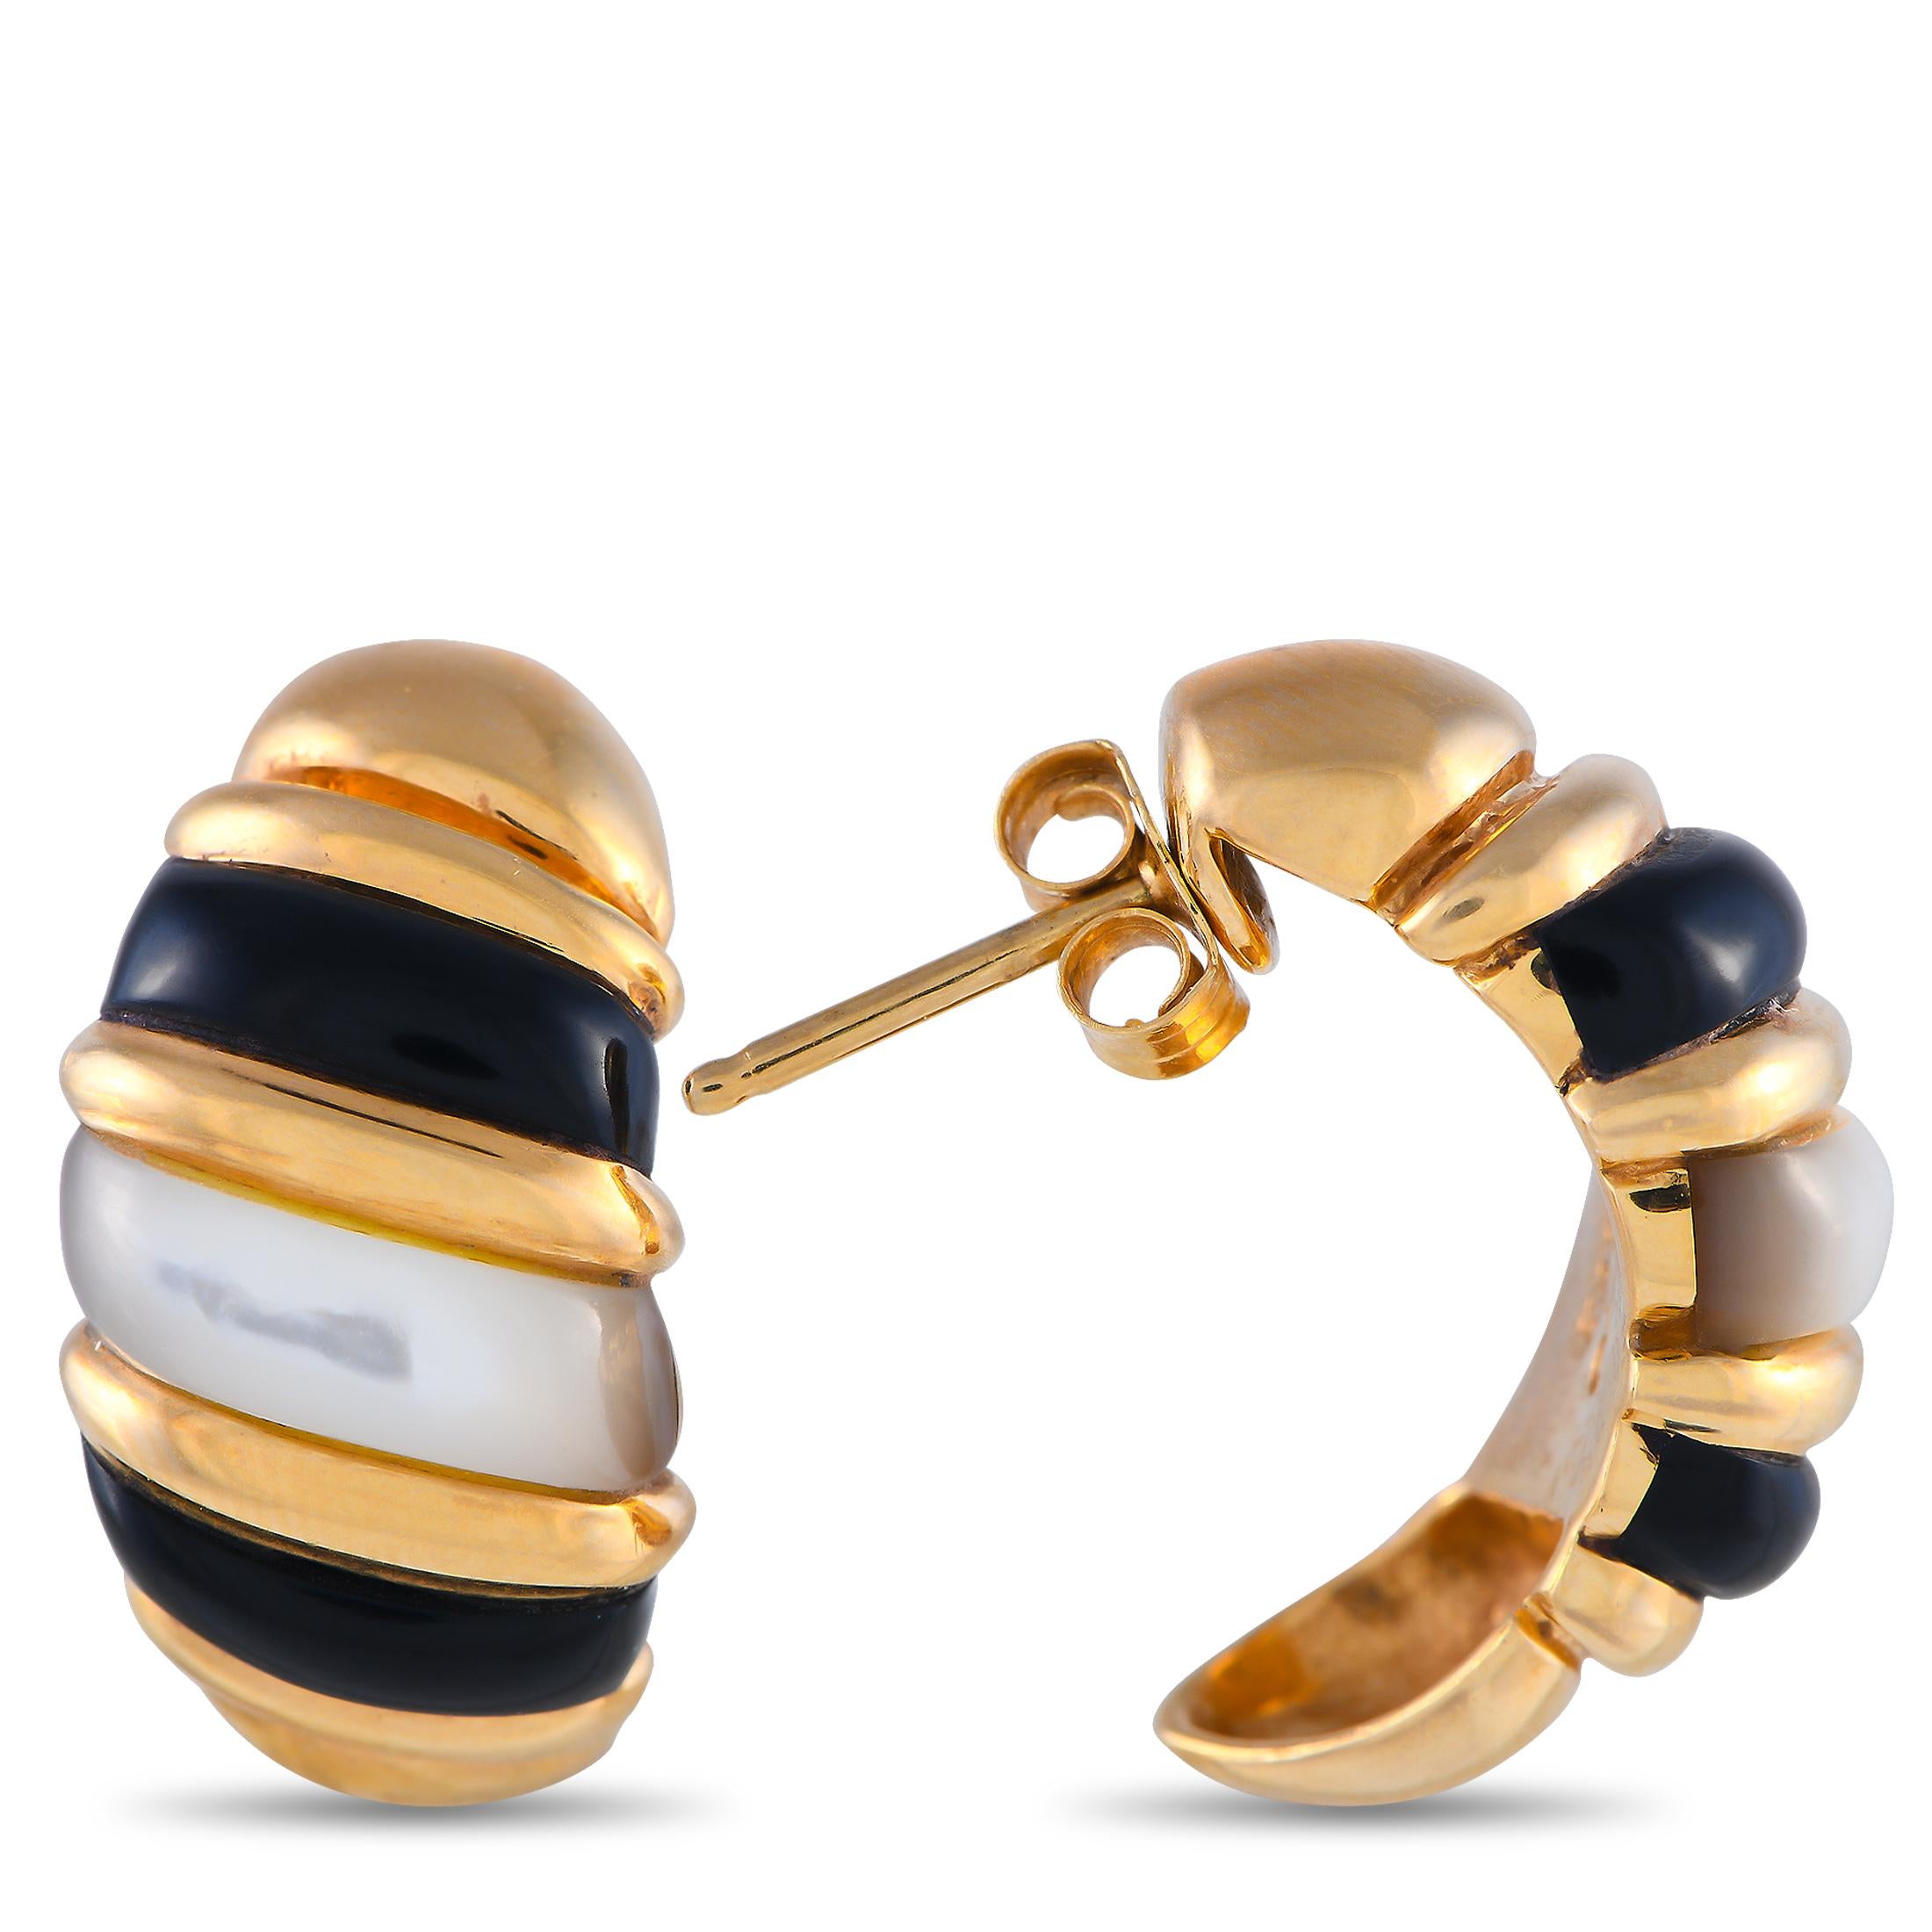 Designed with the timeless trio of black, white, and gold, these Kabana C-Hoops are sure to instantly glam up any look. The earrings feature a chunky C-shaped hoop with ridges in polished yellow gold, accentuated by a pair of onyx and a Mother of